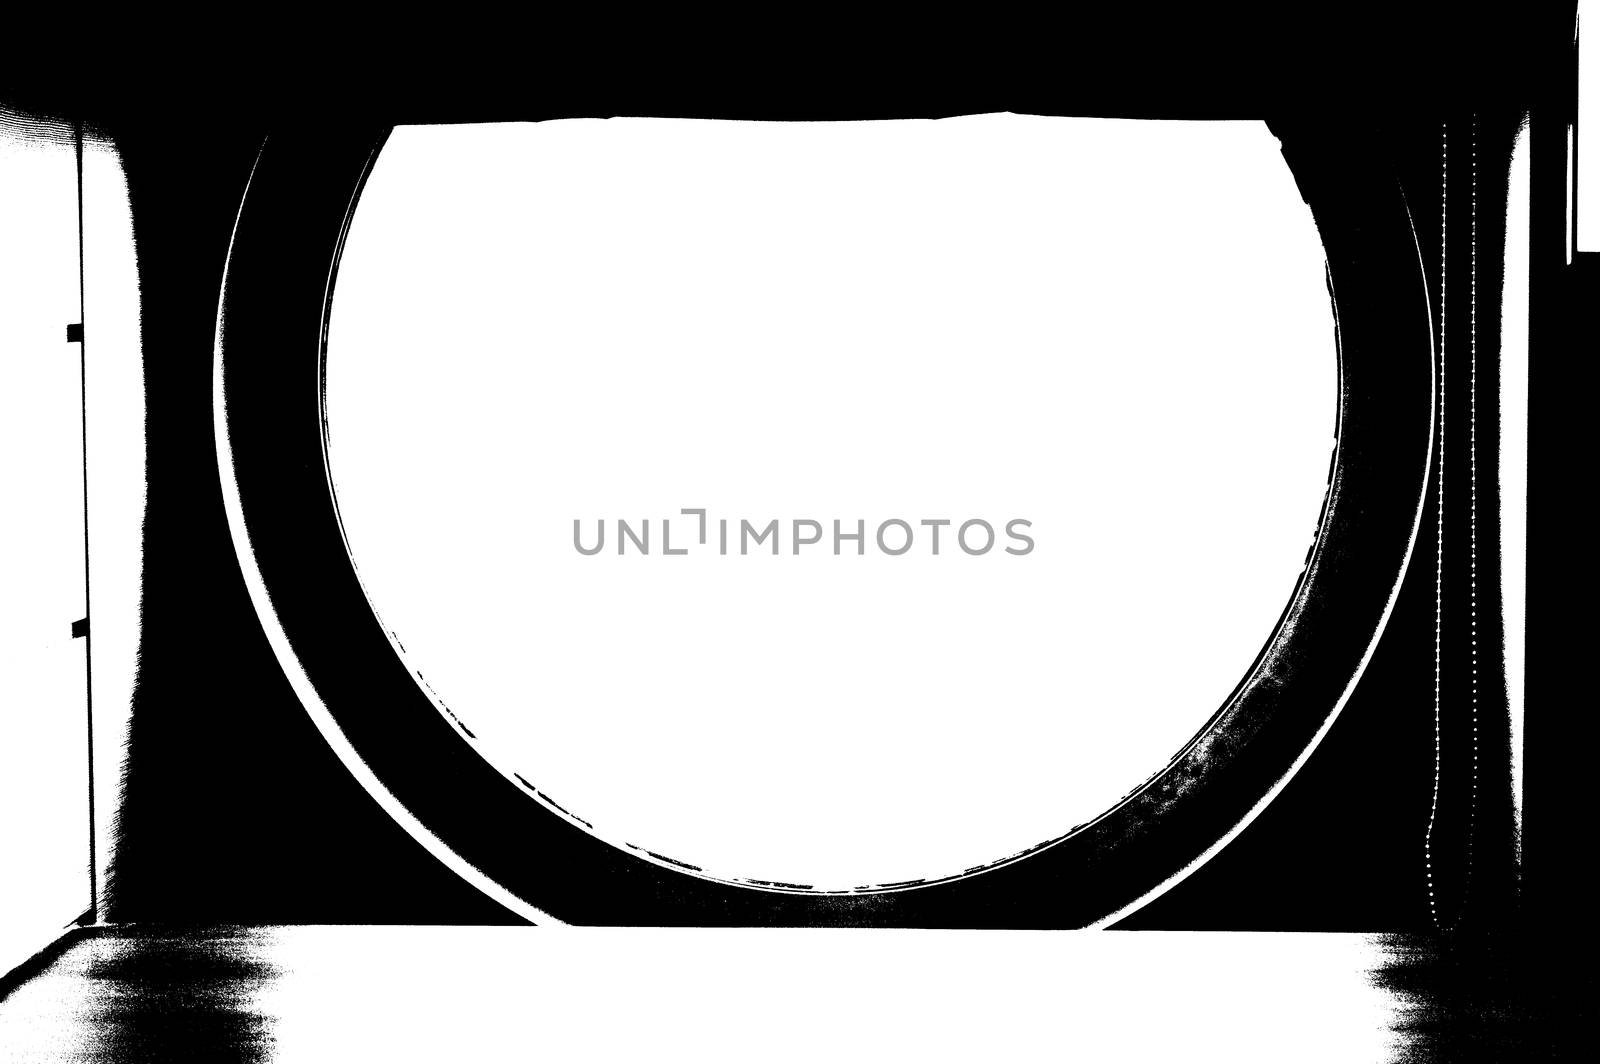 The porthole of the ship with the post processing in black and white.